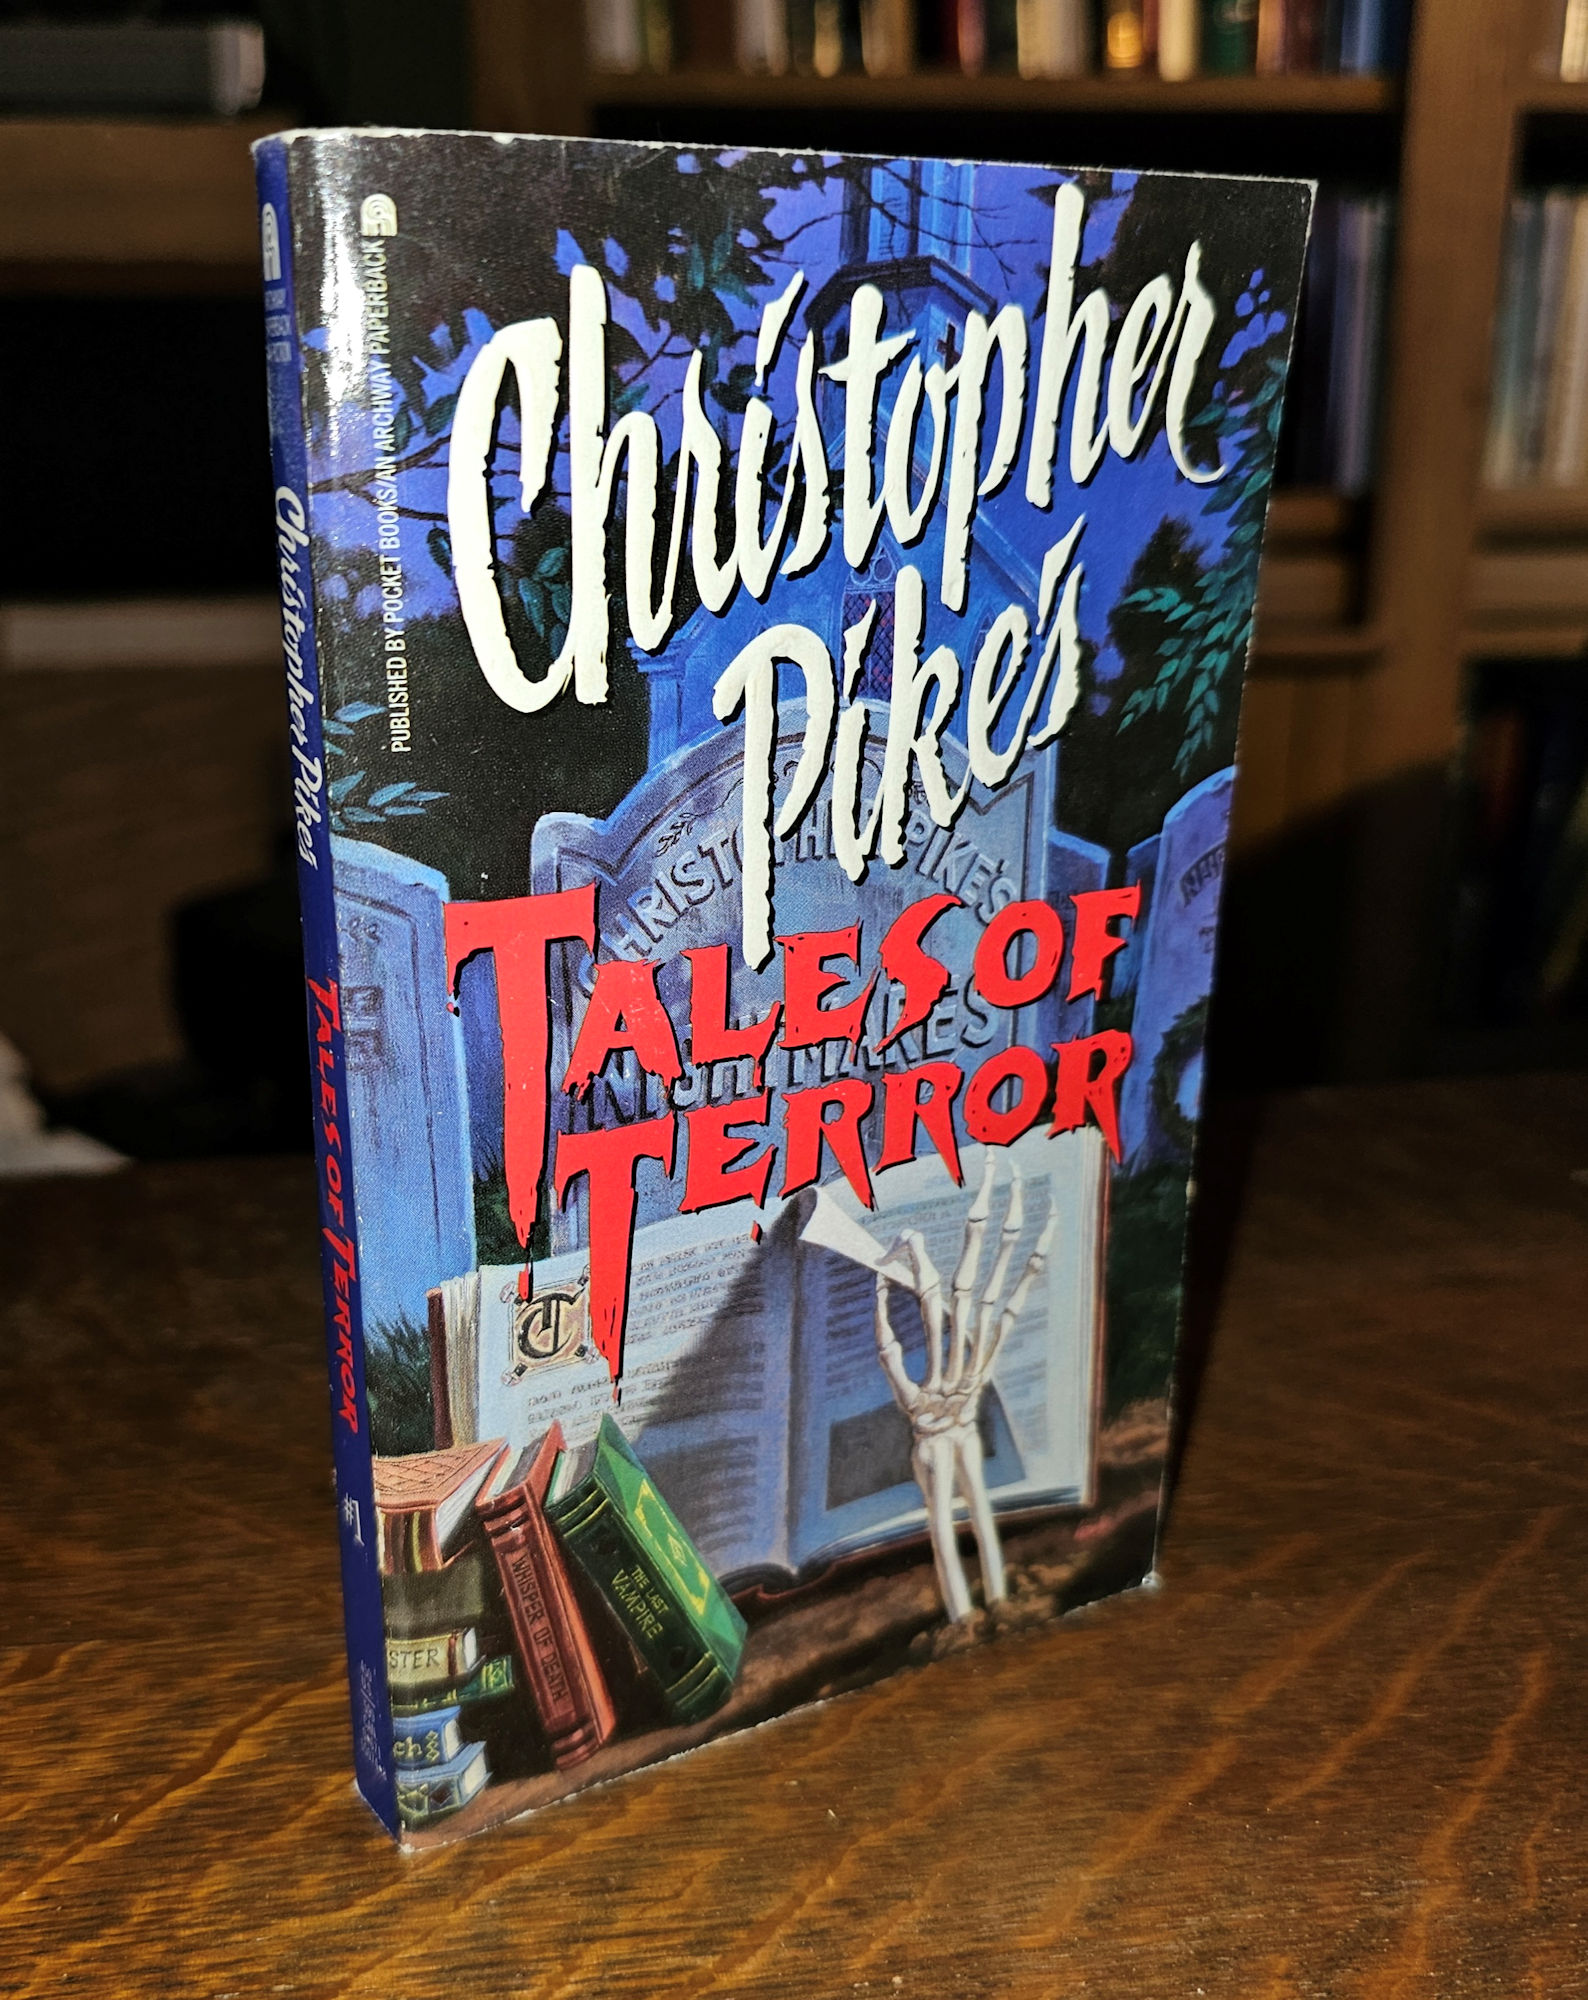 Christopher Pikes Tales of Terror (Book 1)
                        by Christopher Pike